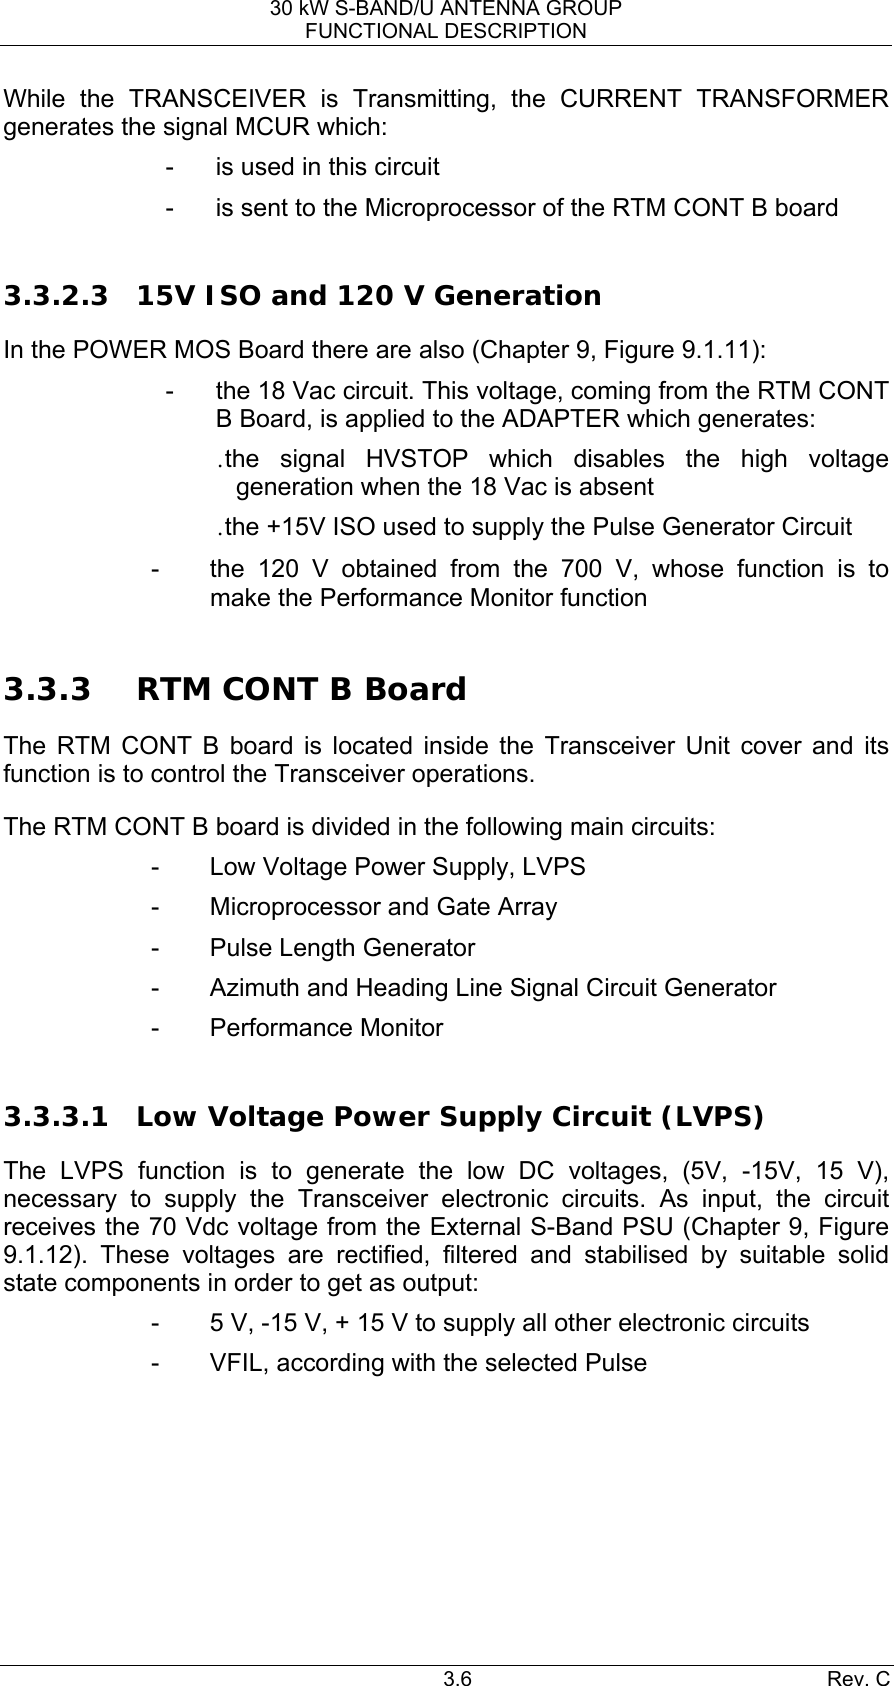 30 kW S-BAND/U ANTENNA GROUP FUNCTIONAL DESCRIPTION 3.6 Rev. C While the TRANSCEIVER is Transmitting, the CURRENT TRANSFORMER generates the signal MCUR which: -  is used in this circuit -  is sent to the Microprocessor of the RTM CONT B board  3.3.2.3 15V ISO and 120 V Generation In the POWER MOS Board there are also (Chapter 9, Figure 9.1.11): -  the 18 Vac circuit. This voltage, coming from the RTM CONT B Board, is applied to the ADAPTER which generates: . the signal HVSTOP which disables the high voltage generation when the 18 Vac is absent . the +15V ISO used to supply the Pulse Generator Circuit -  the 120 V obtained from the 700 V, whose function is to make the Performance Monitor function  3.3.3 RTM CONT B Board The RTM CONT B board is located inside the Transceiver Unit cover and its function is to control the Transceiver operations. The RTM CONT B board is divided in the following main circuits: -  Low Voltage Power Supply, LVPS -  Microprocessor and Gate Array -  Pulse Length Generator -  Azimuth and Heading Line Signal Circuit Generator - Performance Monitor  3.3.3.1 Low Voltage Power Supply Circuit (LVPS) The LVPS function is to generate the low DC voltages, (5V, -15V, 15 V), necessary to supply the Transceiver electronic circuits. As input, the circuit receives the 70 Vdc voltage from the External S-Band PSU (Chapter 9, Figure 9.1.12). These voltages are rectified, filtered and stabilised by suitable solid state components in order to get as output: -  5 V, -15 V, + 15 V to supply all other electronic circuits -  VFIL, according with the selected Pulse       